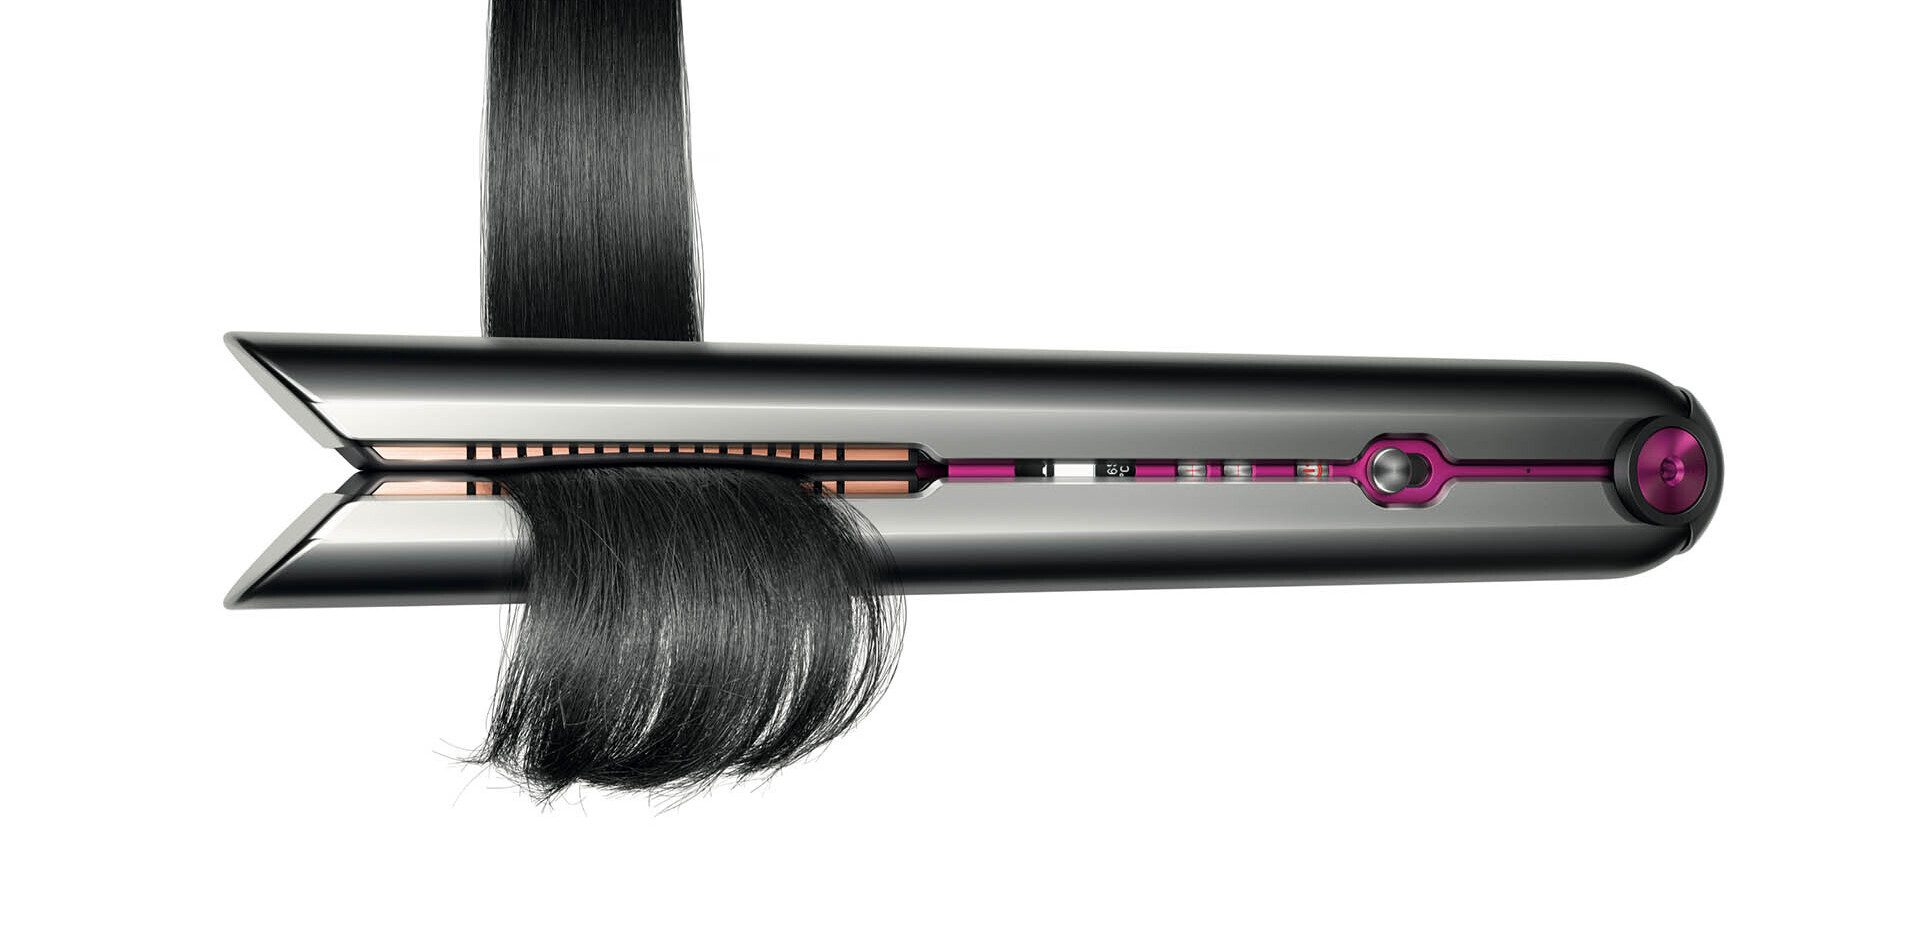 Dyson’s newest beauty product is a super fancy $499 hair straightener